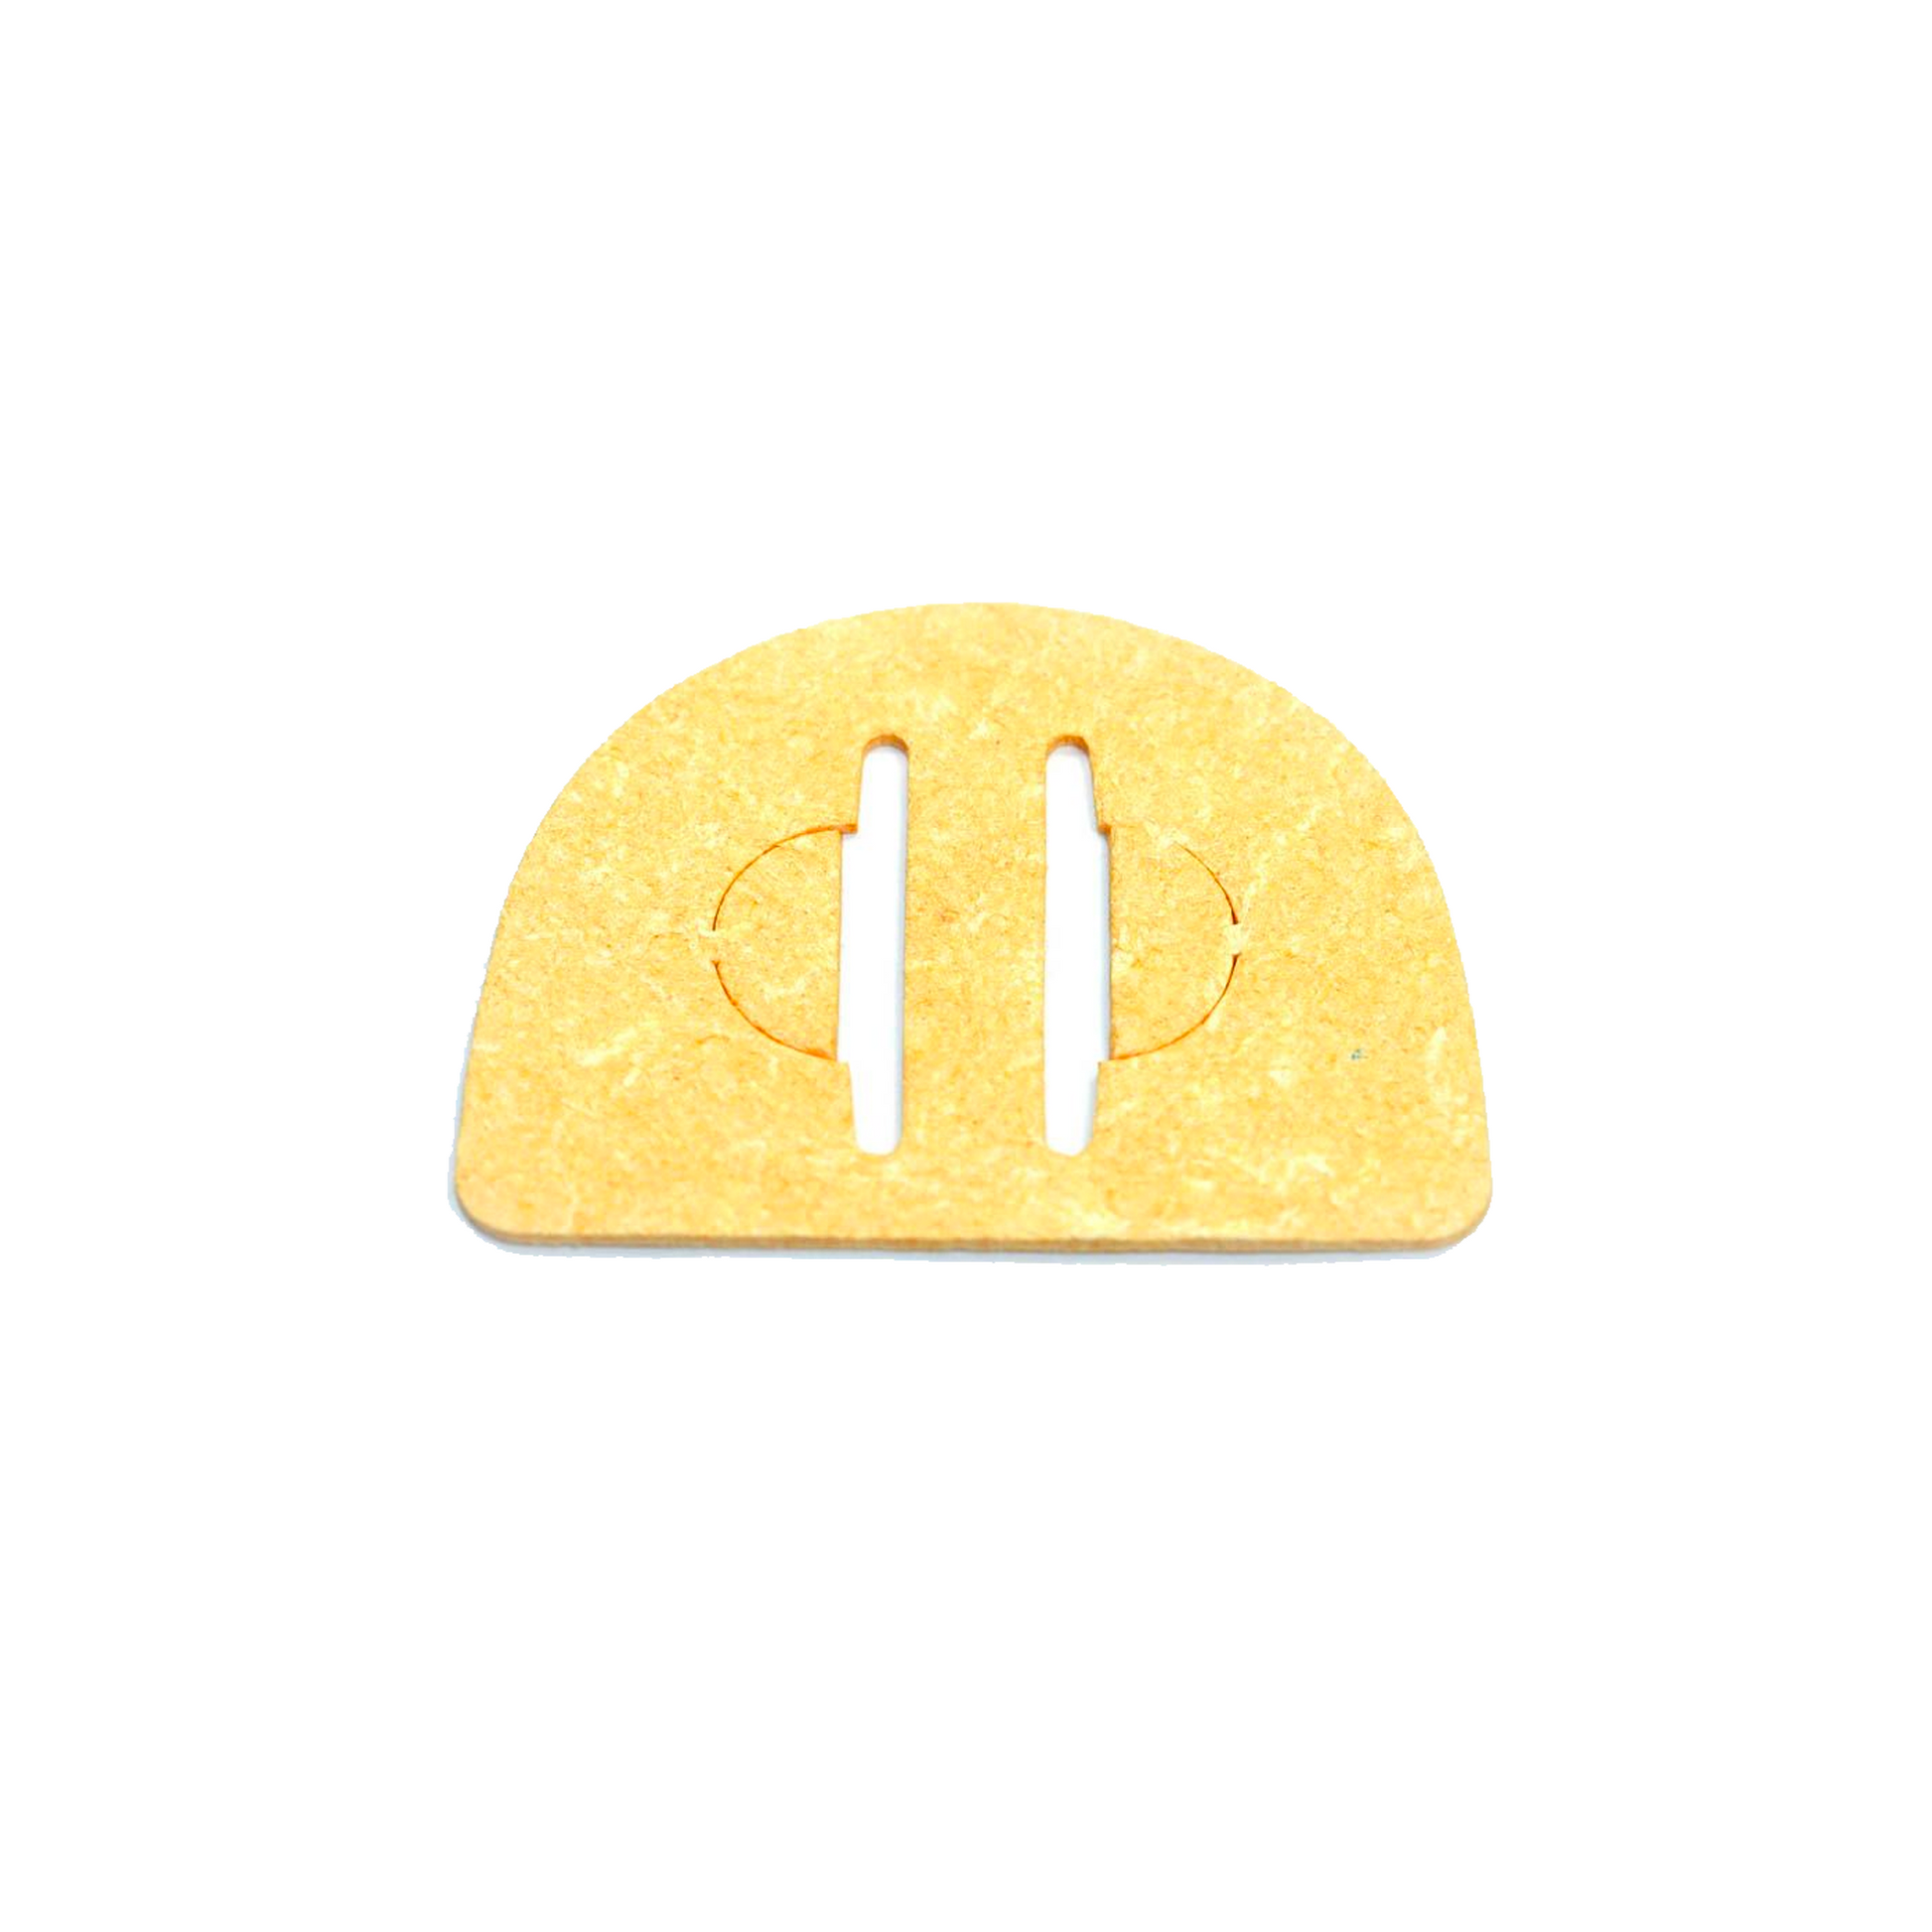 Hakko Products_ A5038 Cleaning Sponge_ Tip Cleaning Accessories_ Hakko Products